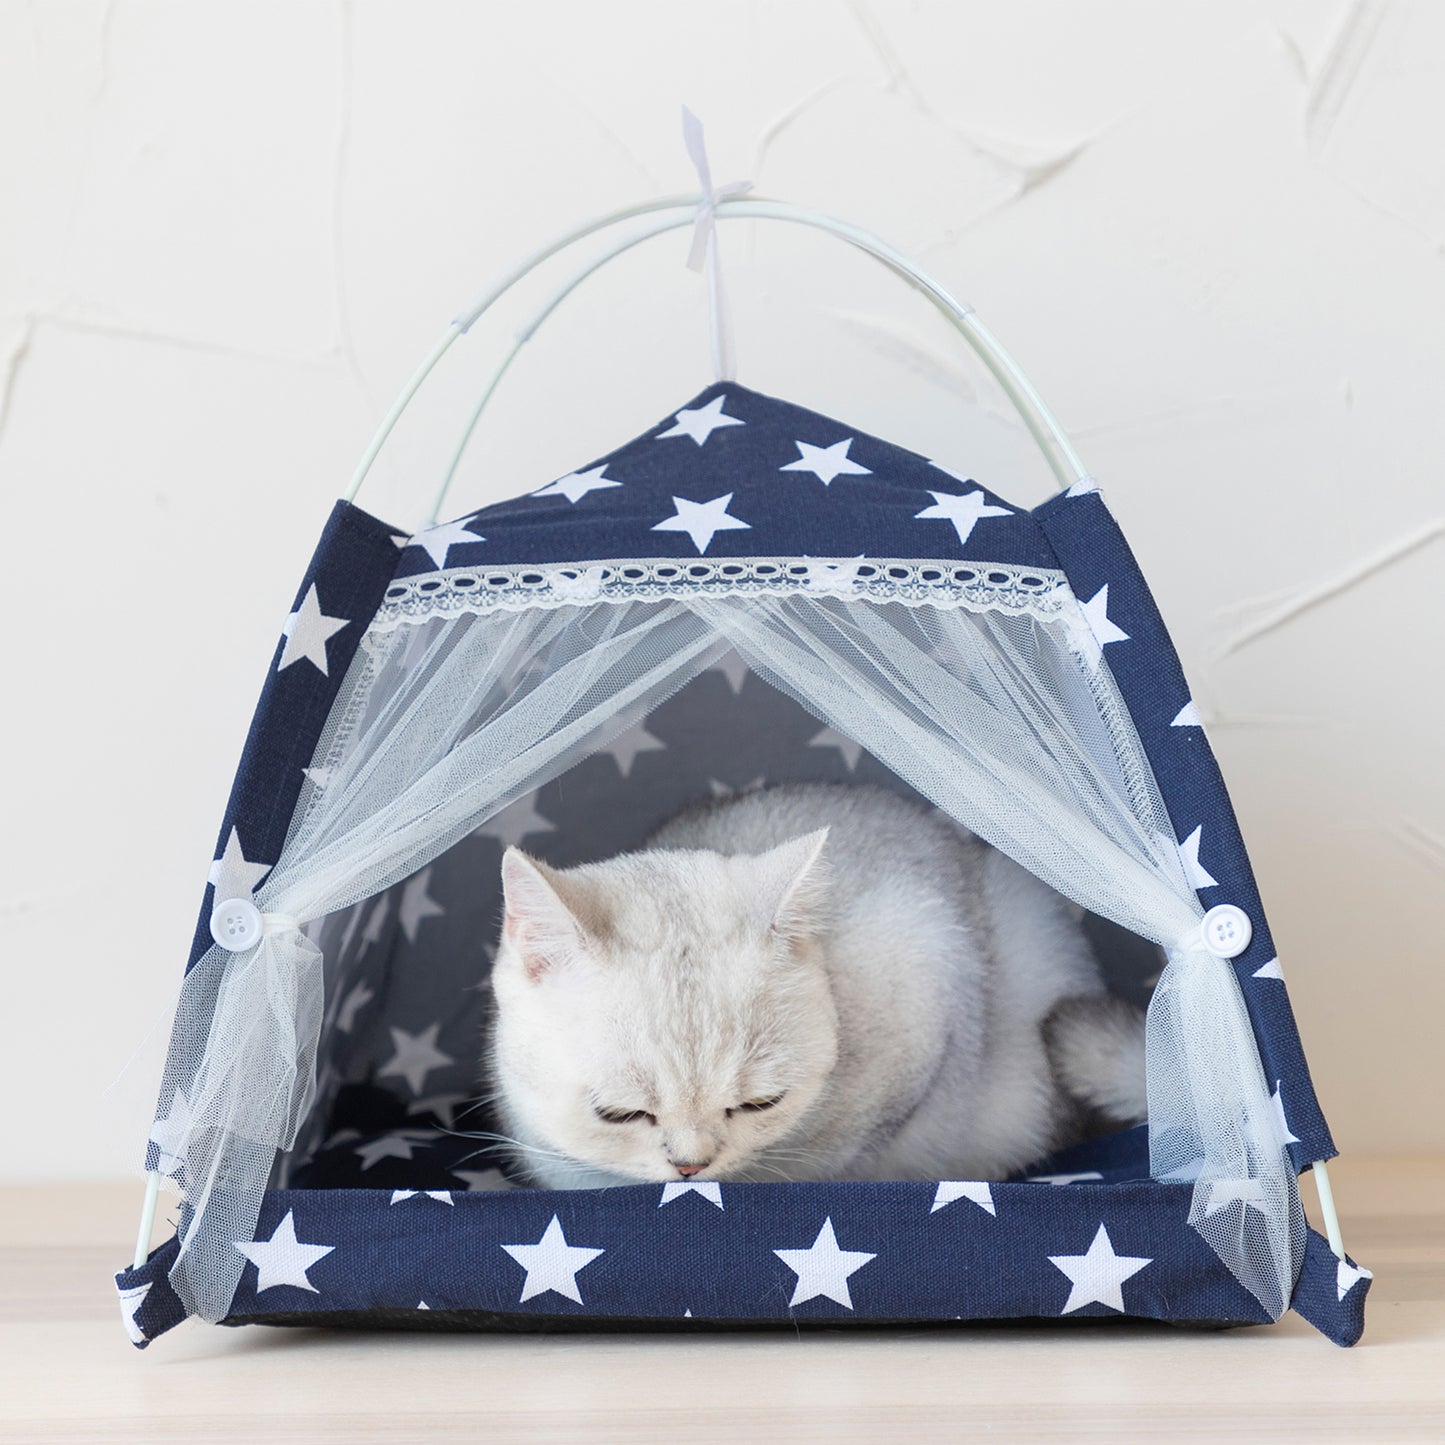 Lovely Caves Cat Tent Bed with Non-Slip Soft Pad